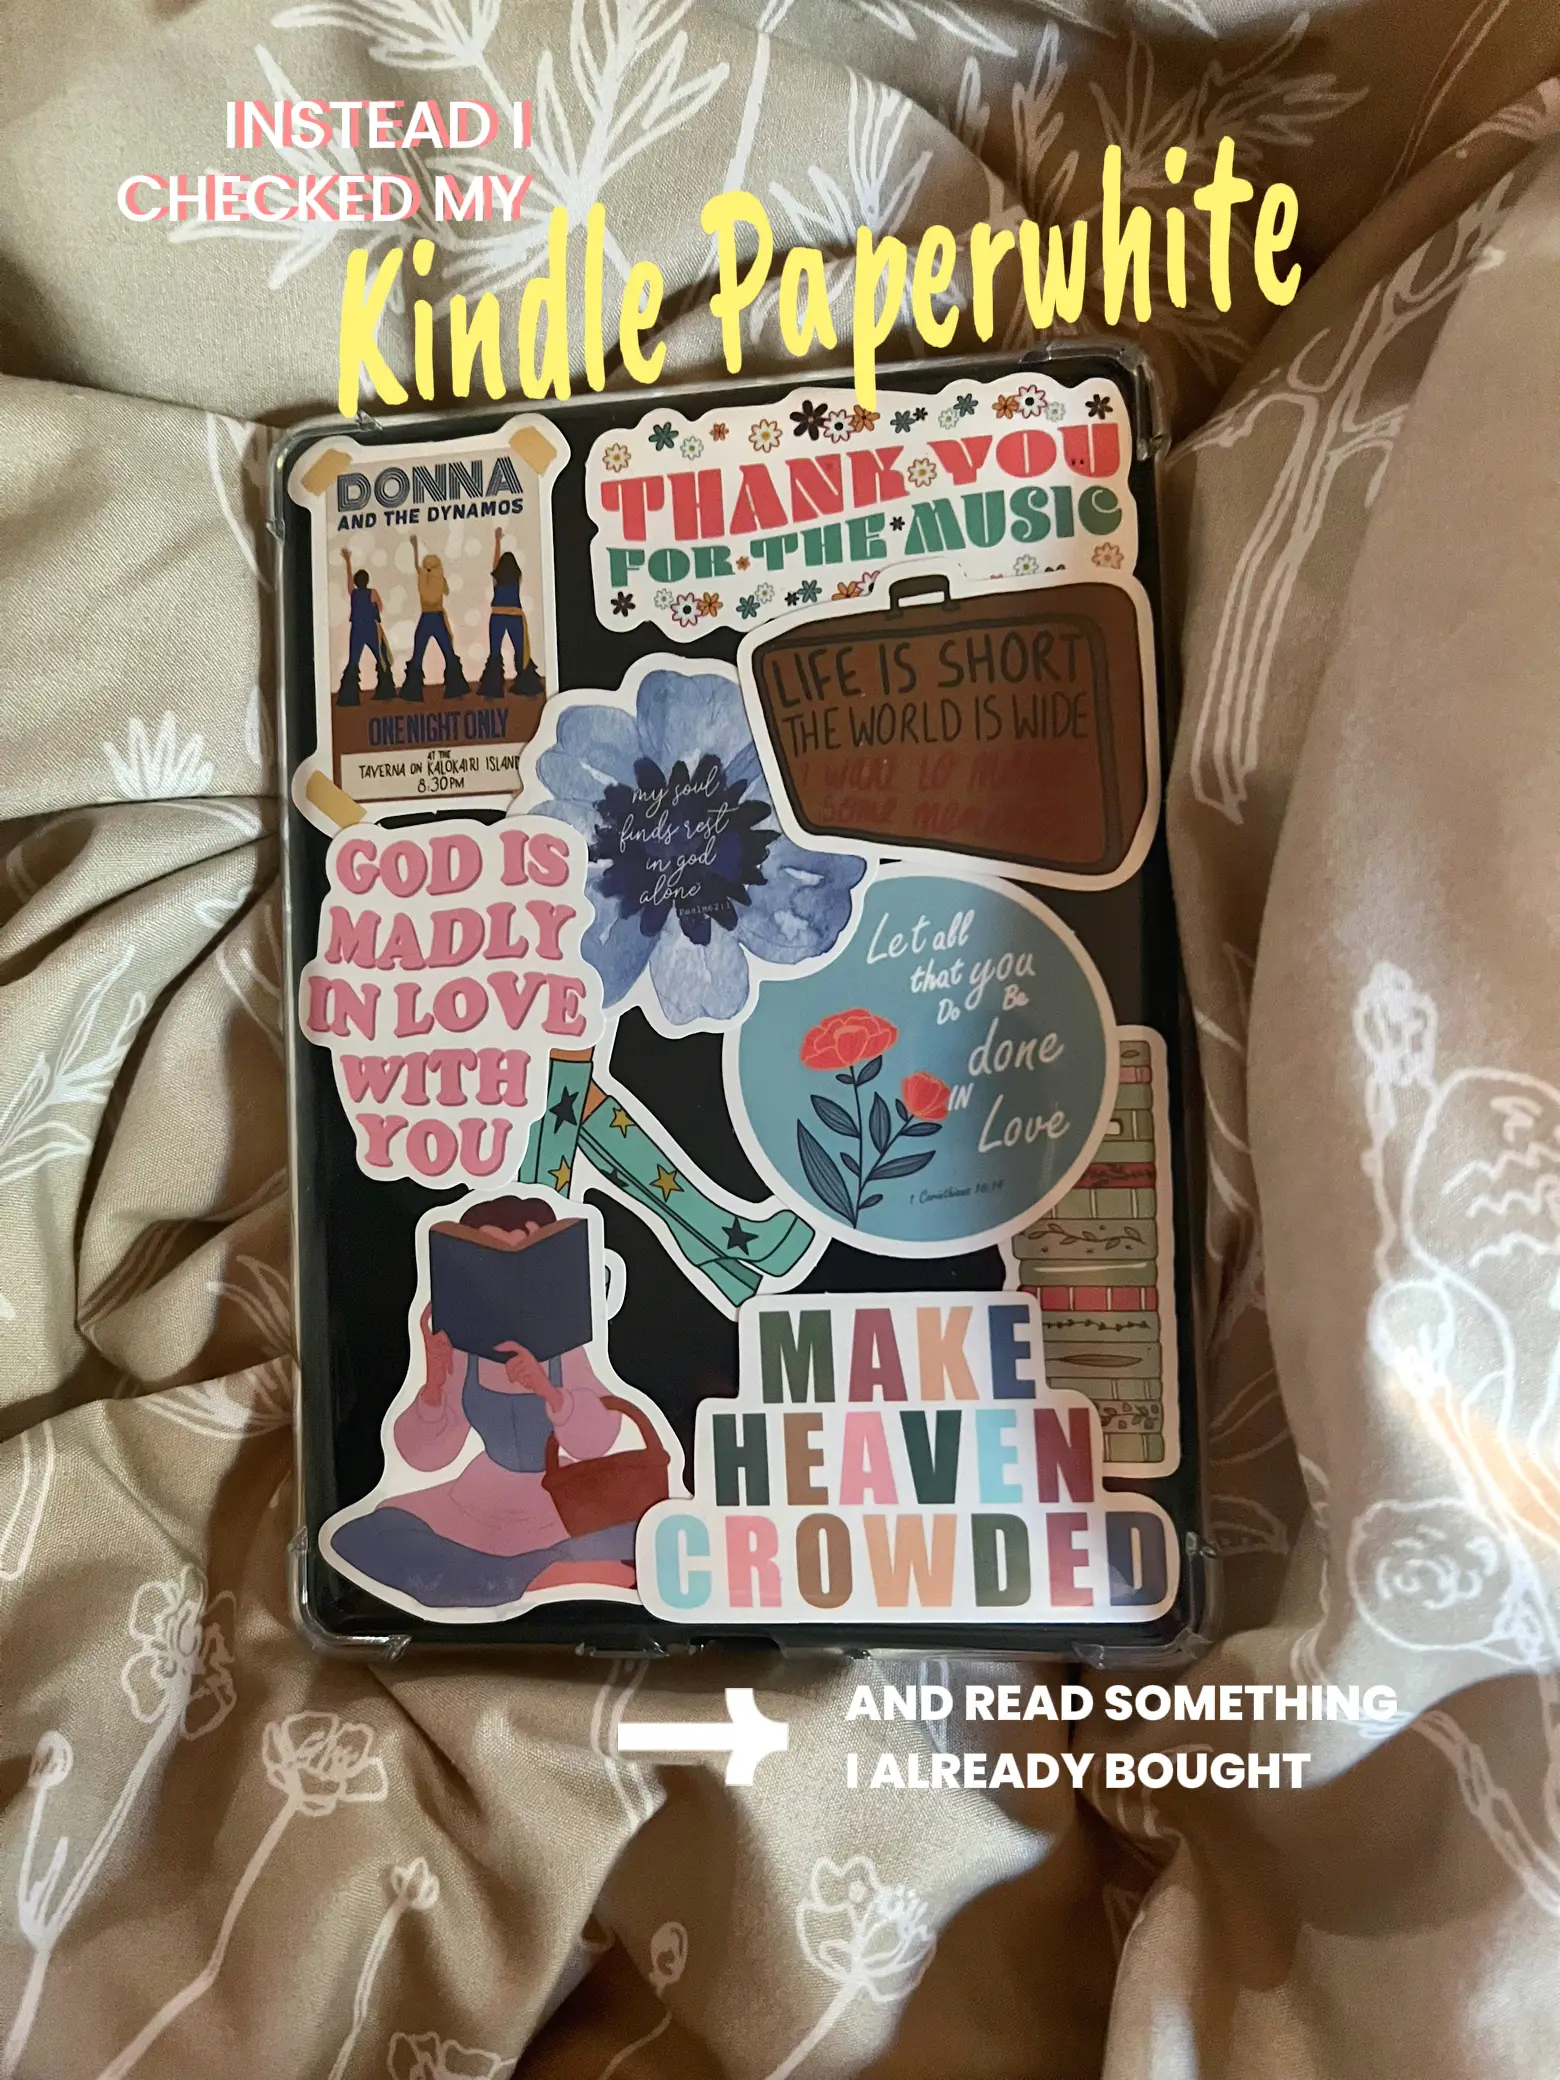 Kindle Sticker Tour, Gallery posted by Lindsey Harvey